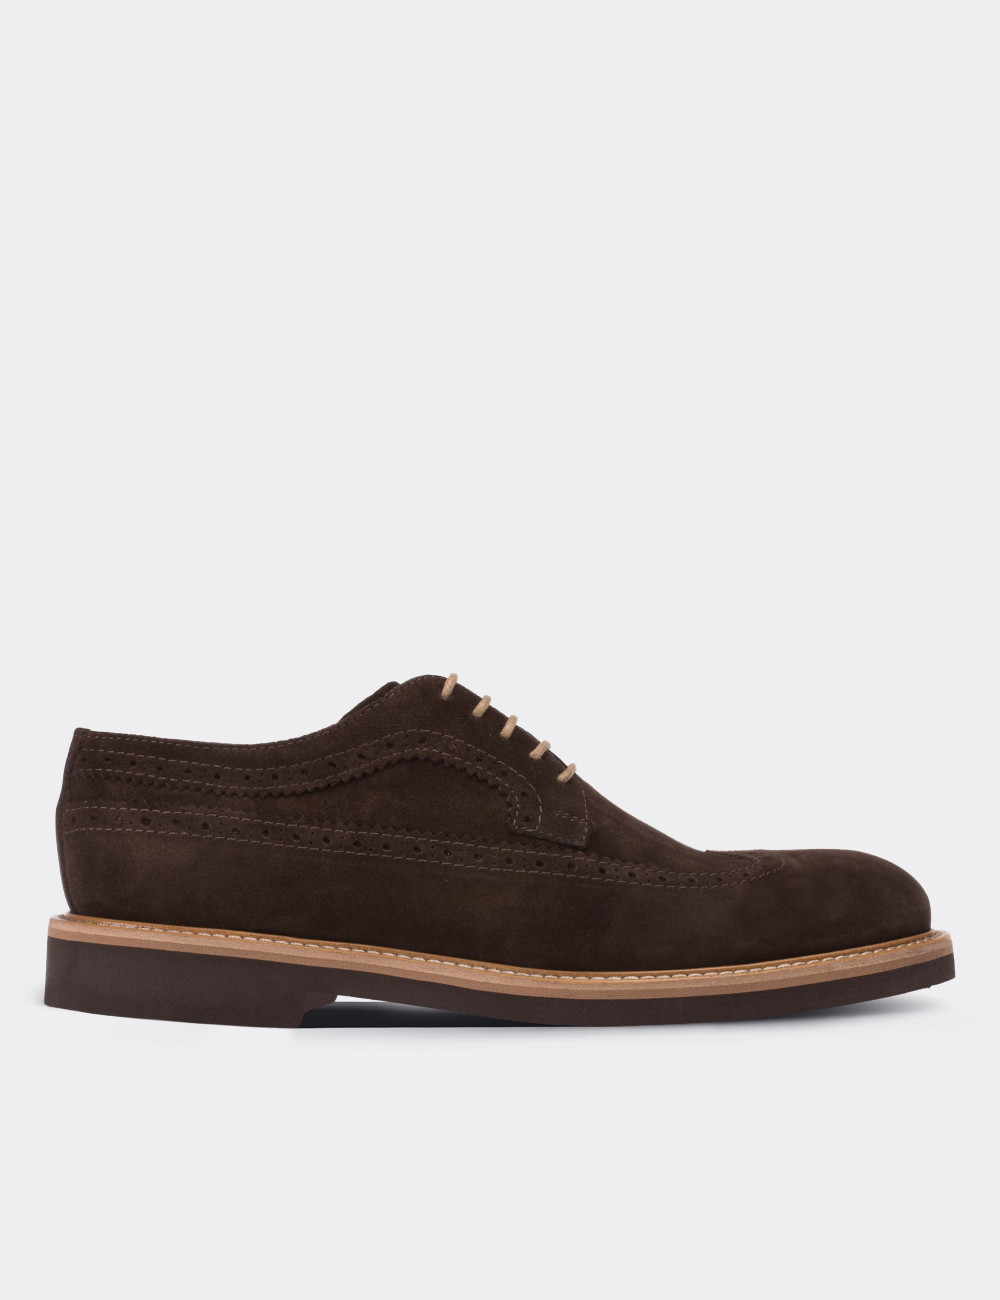 Brown Suede Leather Lace-up Shoes - 01293MKHVE20